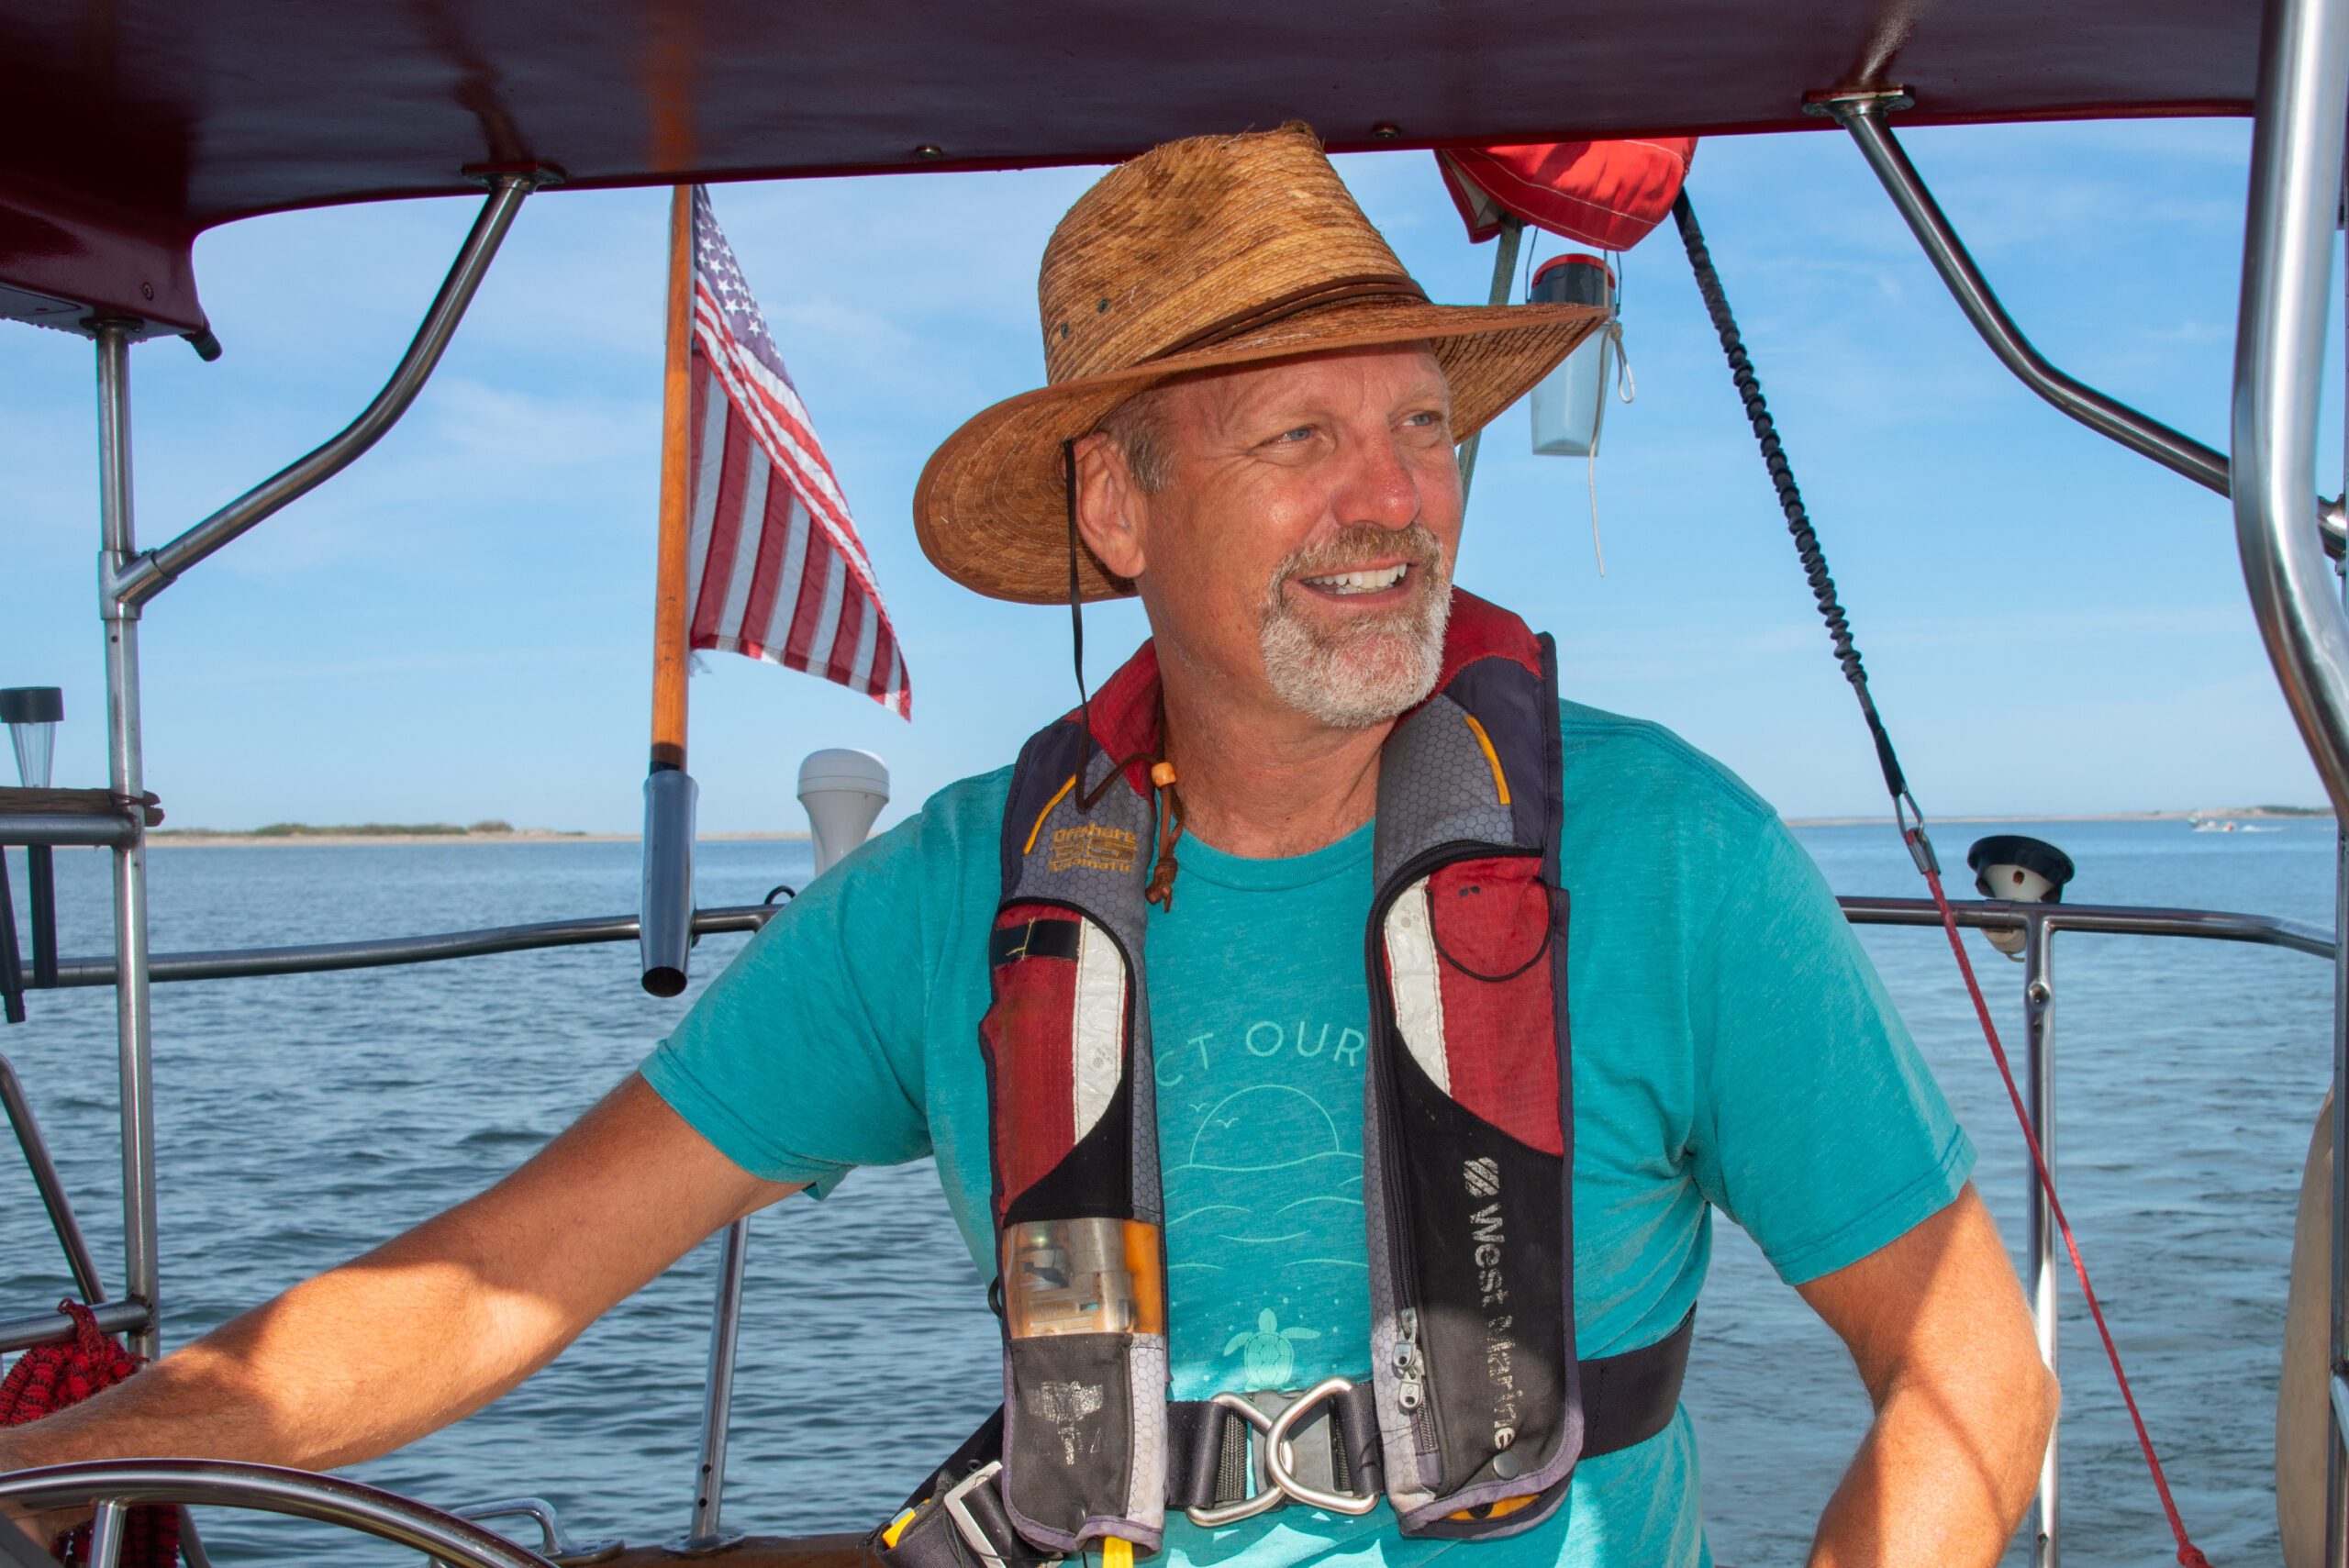 Bill Streever smiles and looks into the distance while sailing a boat.